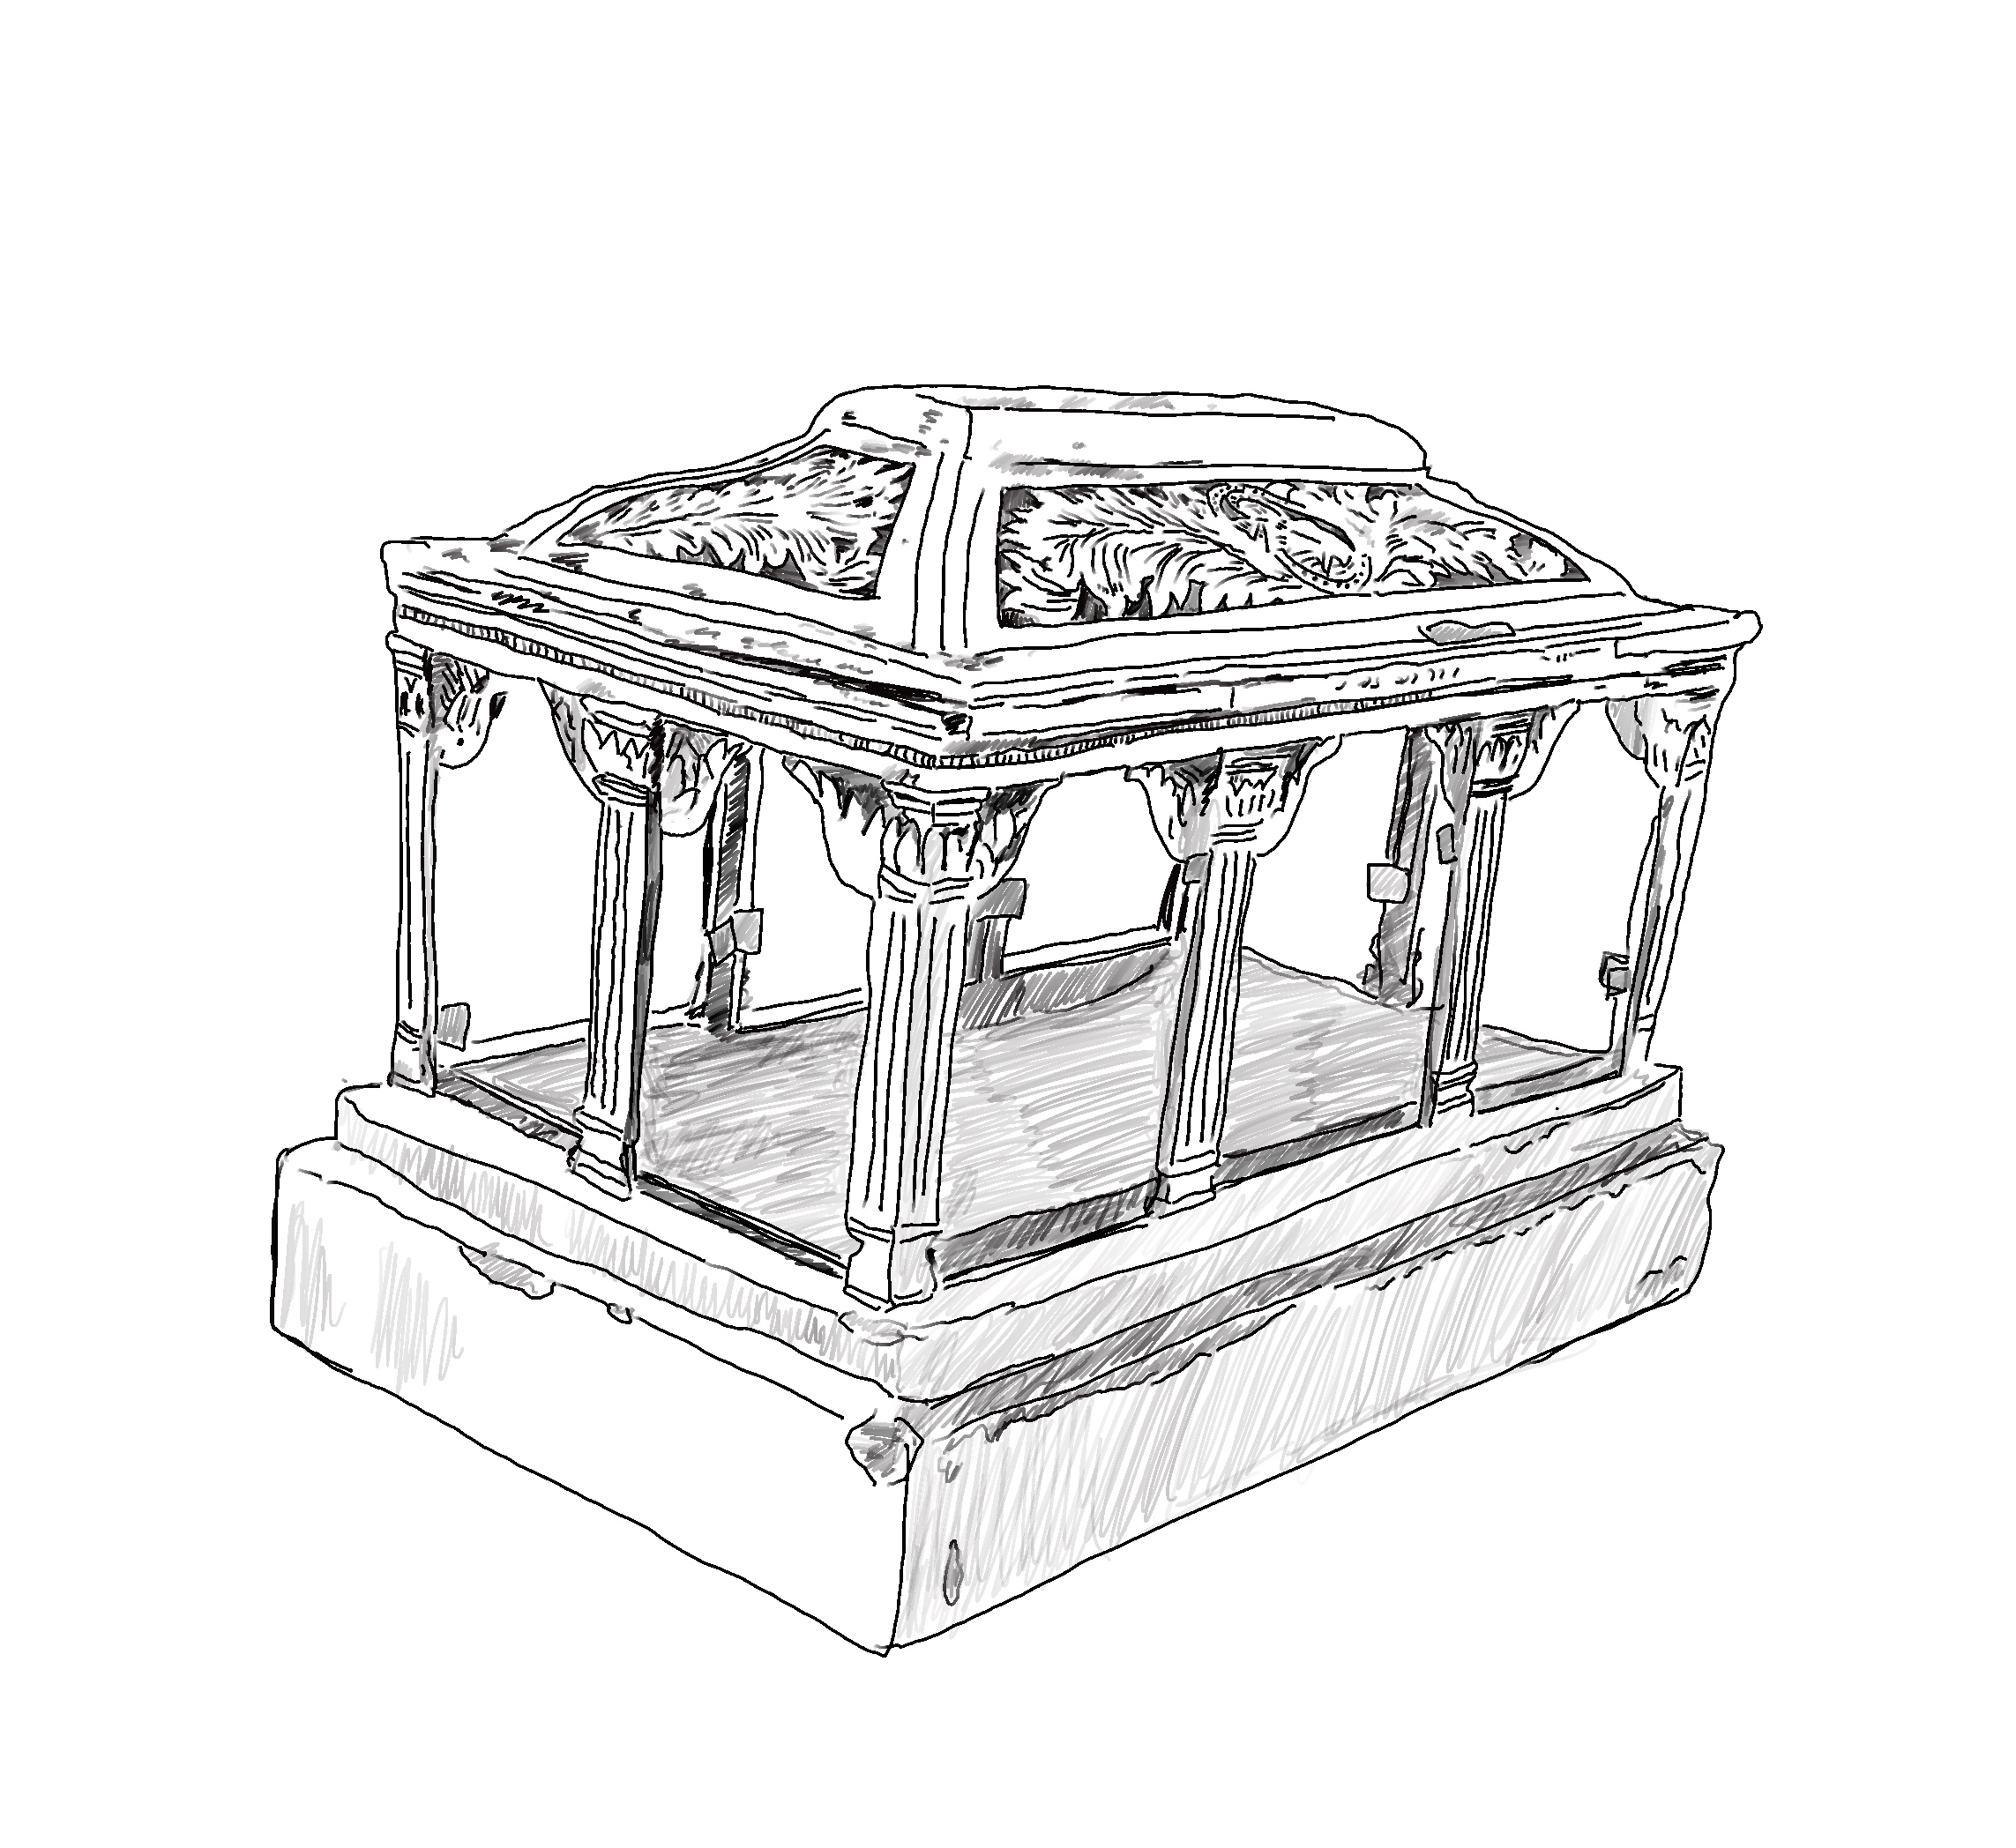 black and white drawing of ornate architectural vessel